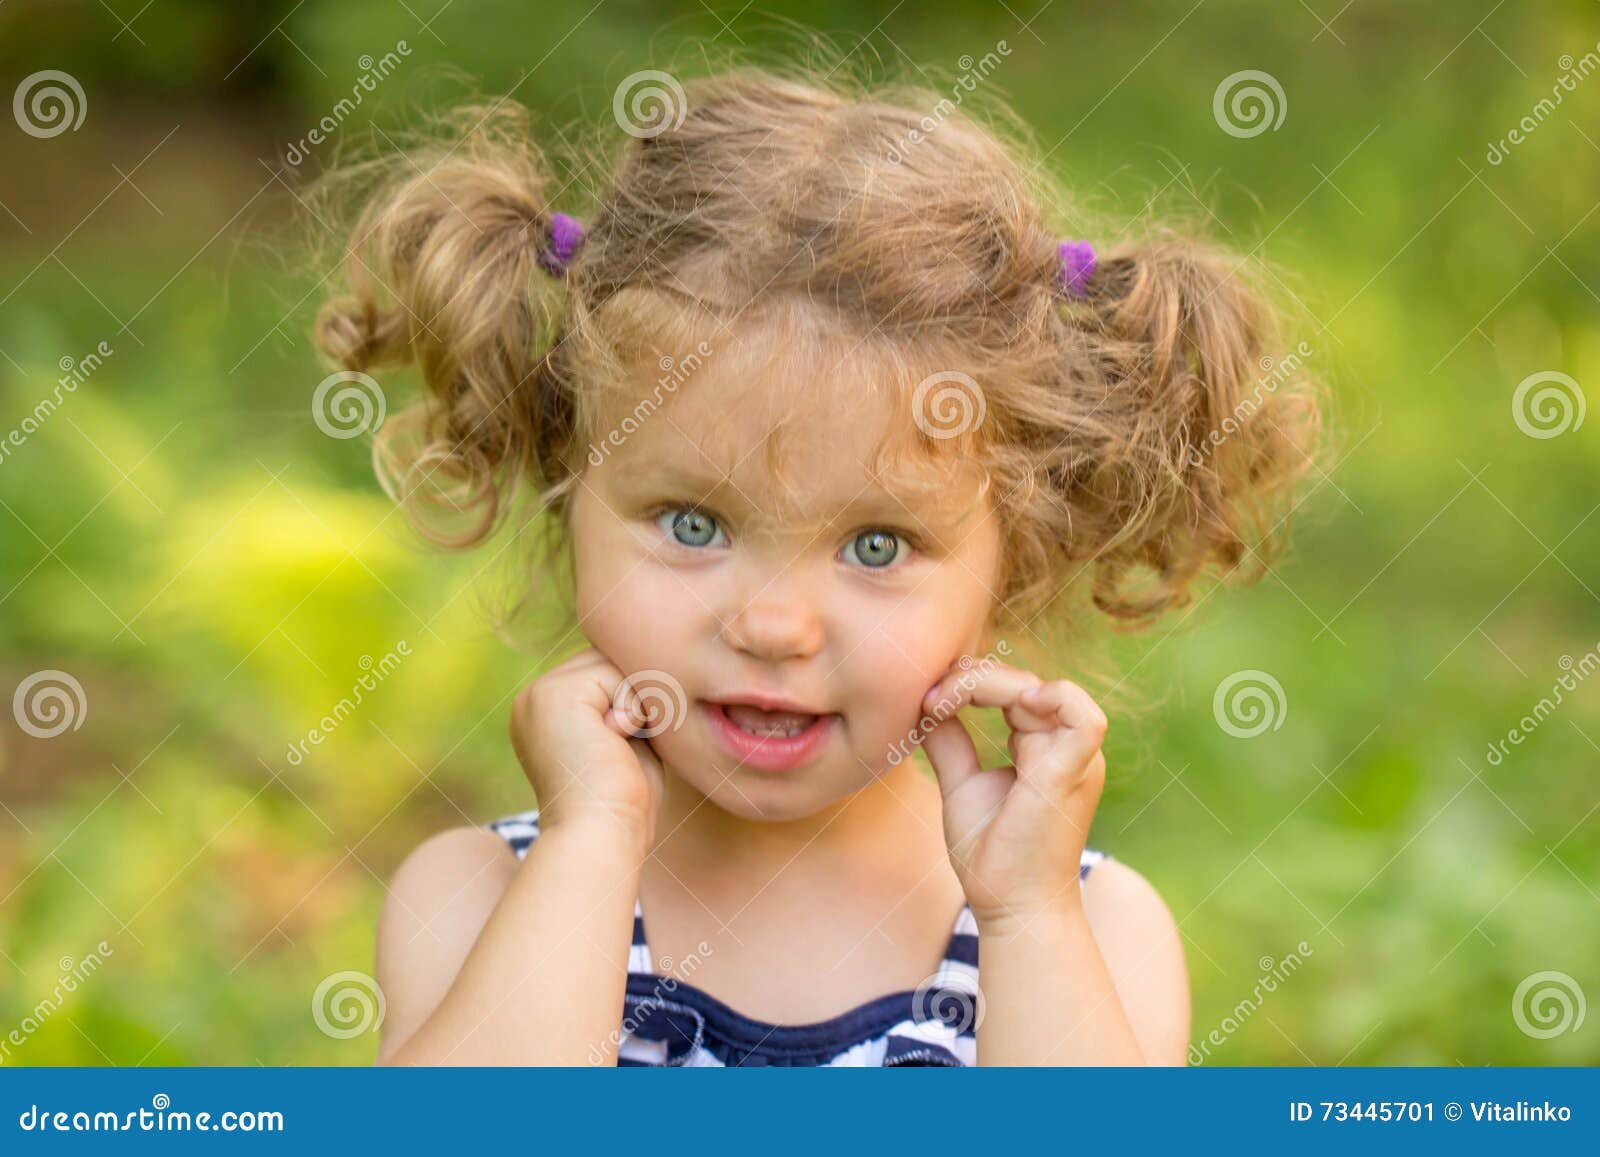 Cute Little Girl With Curly Blond Hair Stock Image Image Of